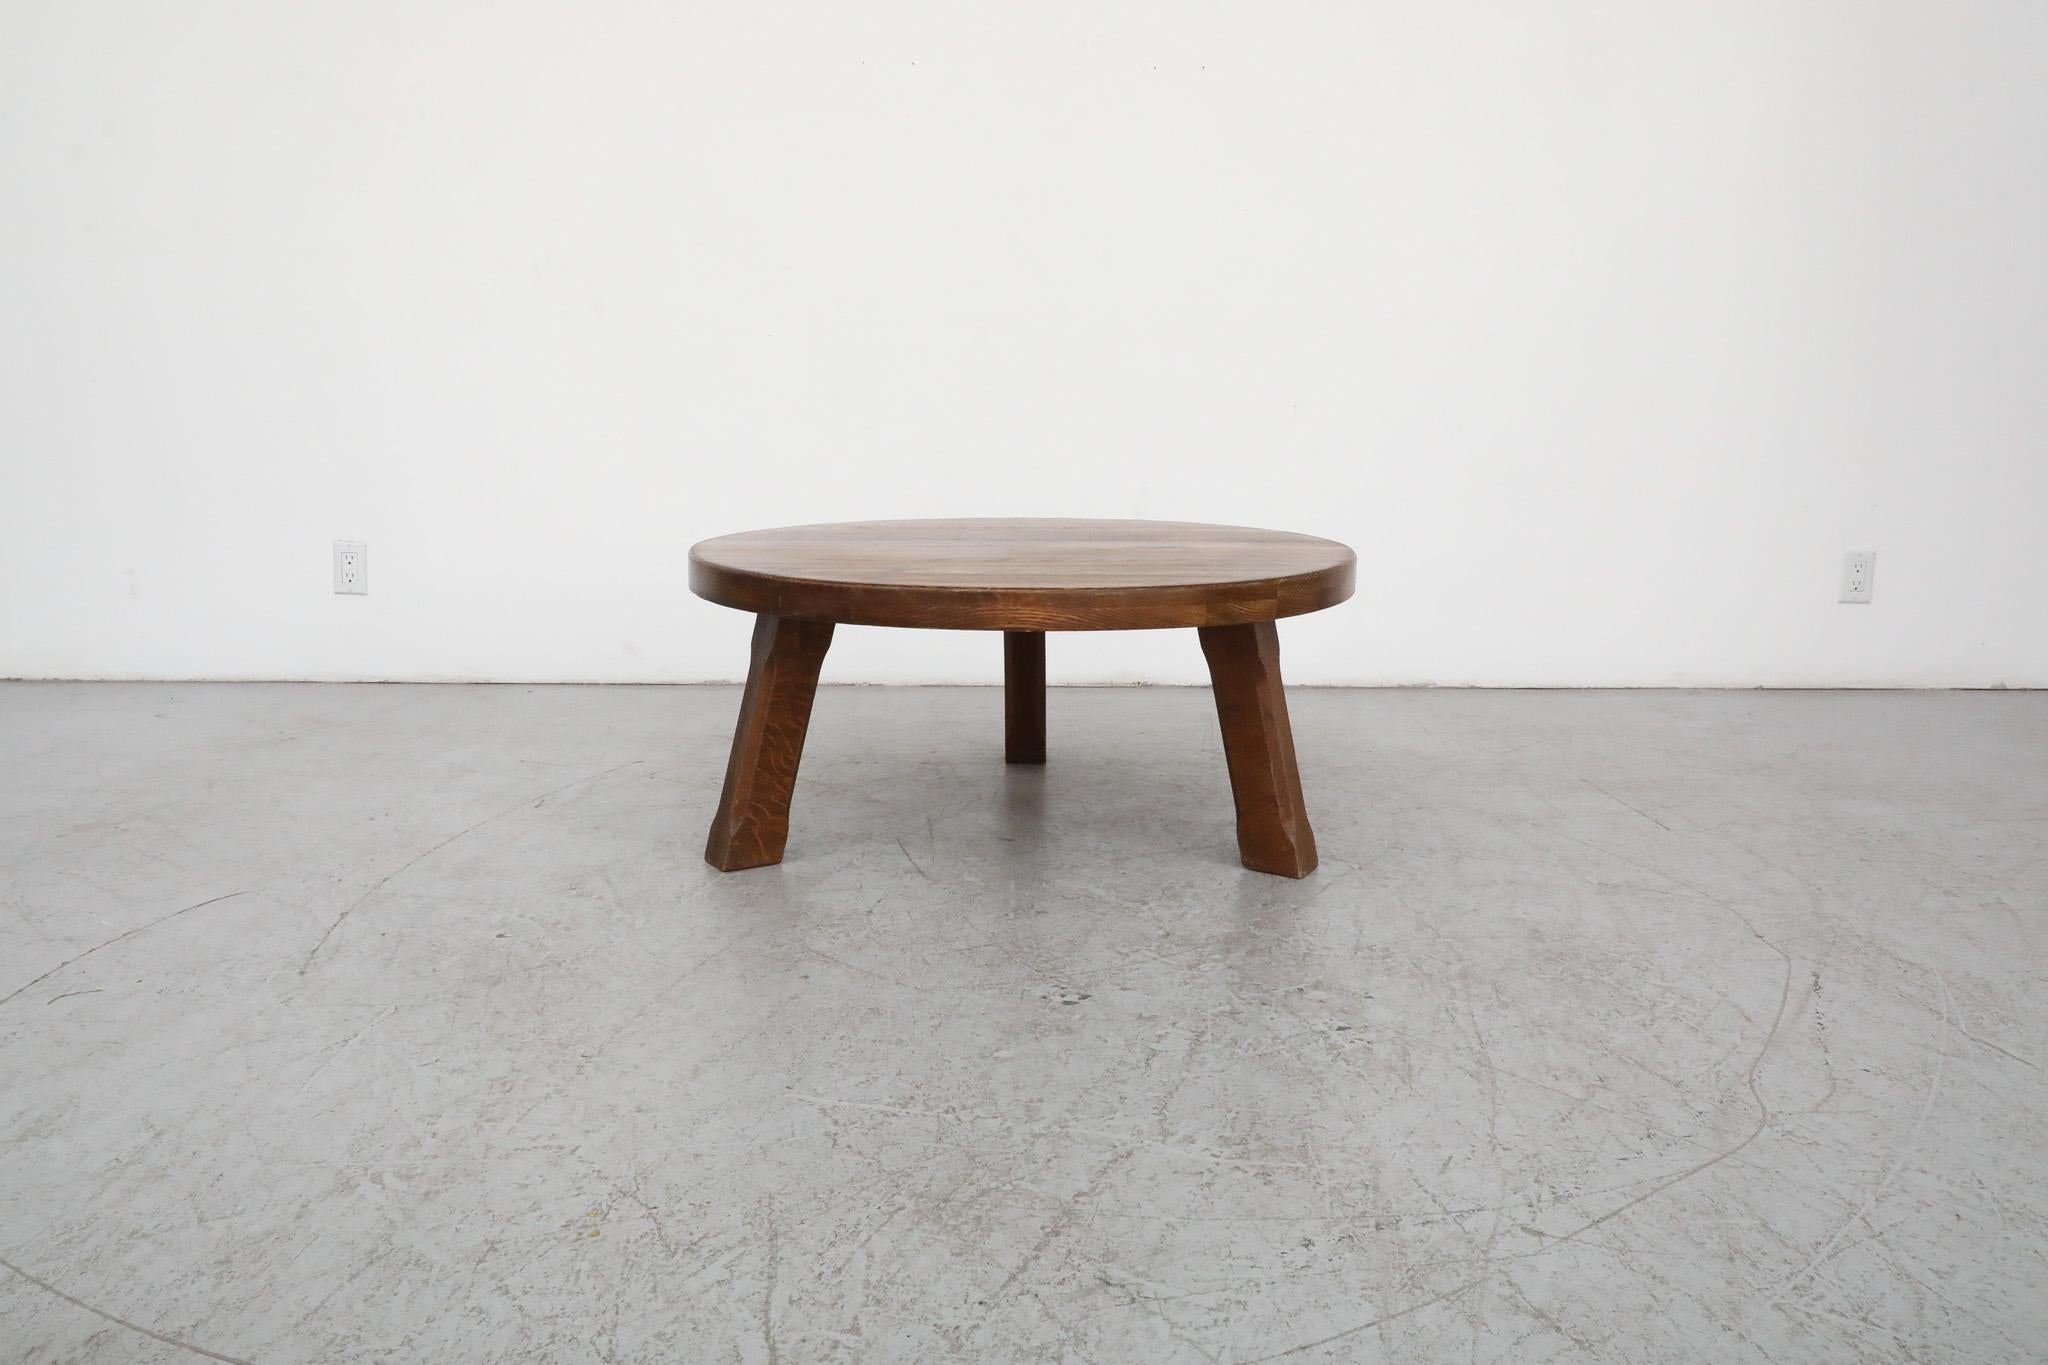 This Brutalist Pierre Chapo style coffee table is made from very sturdy solid oak, with a generously sized round top and subtly carved tripod legs. It is in original condition with some visible wear, including some natural cracking. Wear is